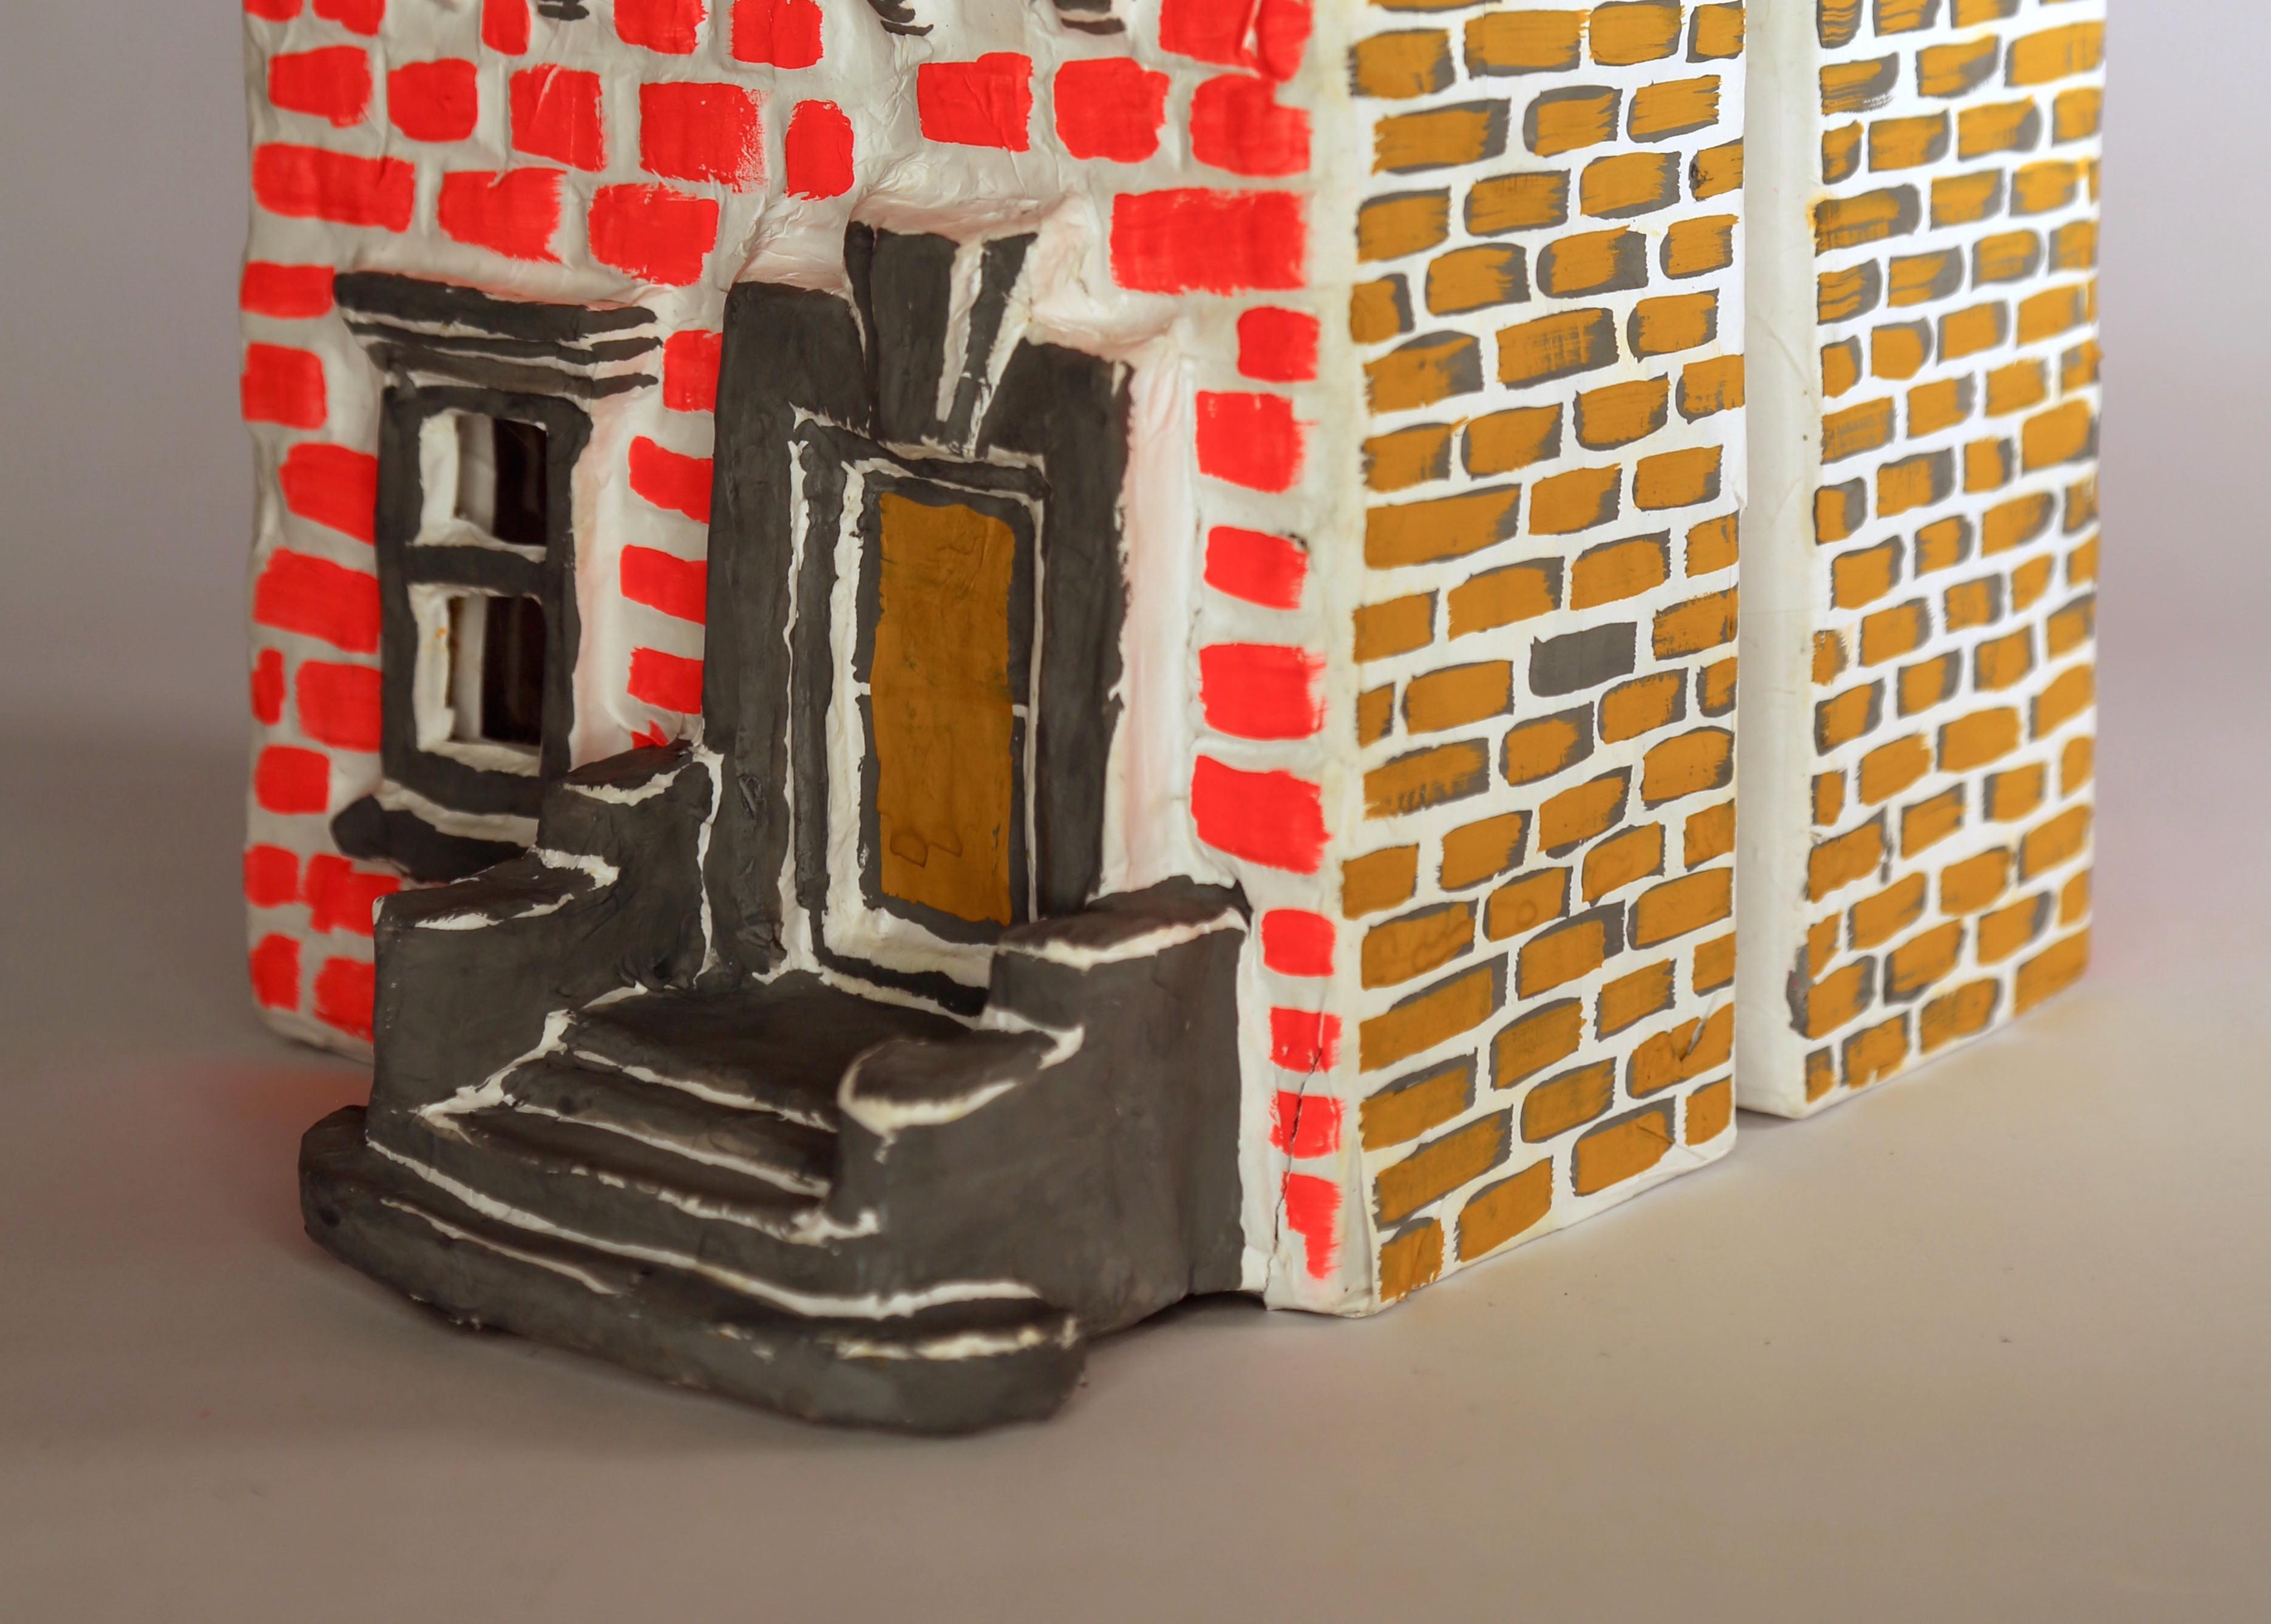 Mixed Media Sculpture of House: 'Spilt House' For Sale 1